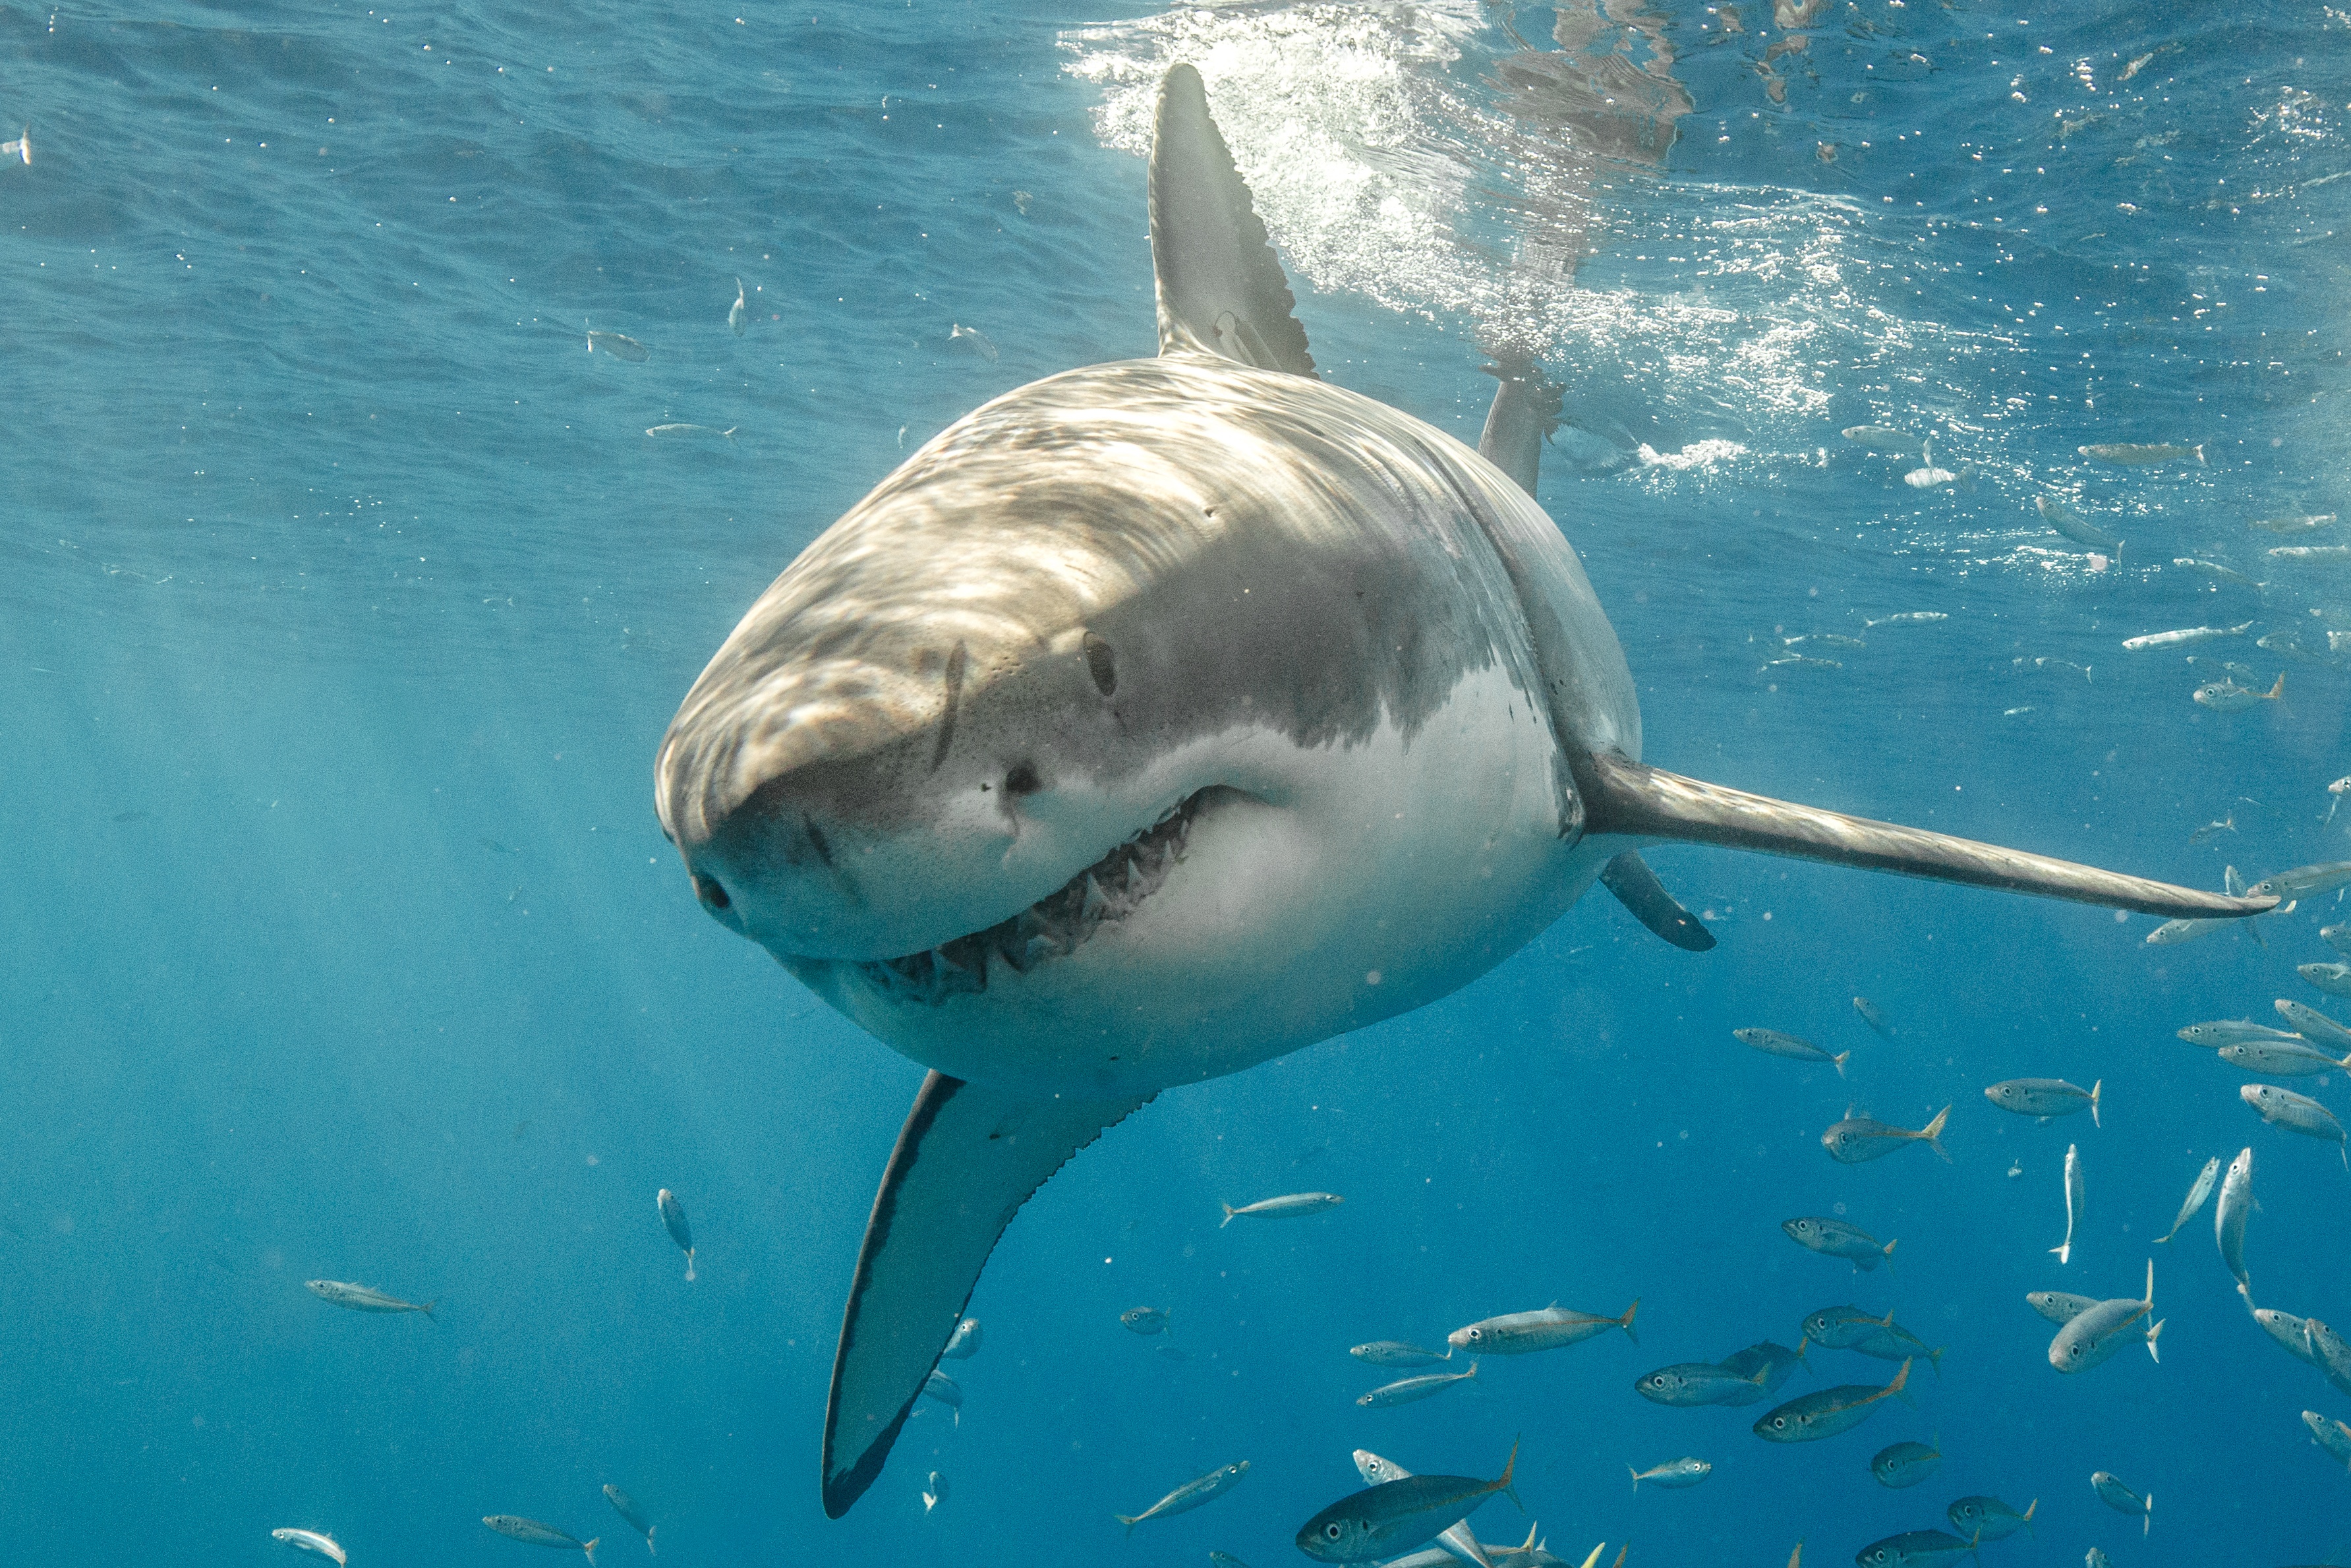 Great White Sharks news & latest pictures from Newsweek.com